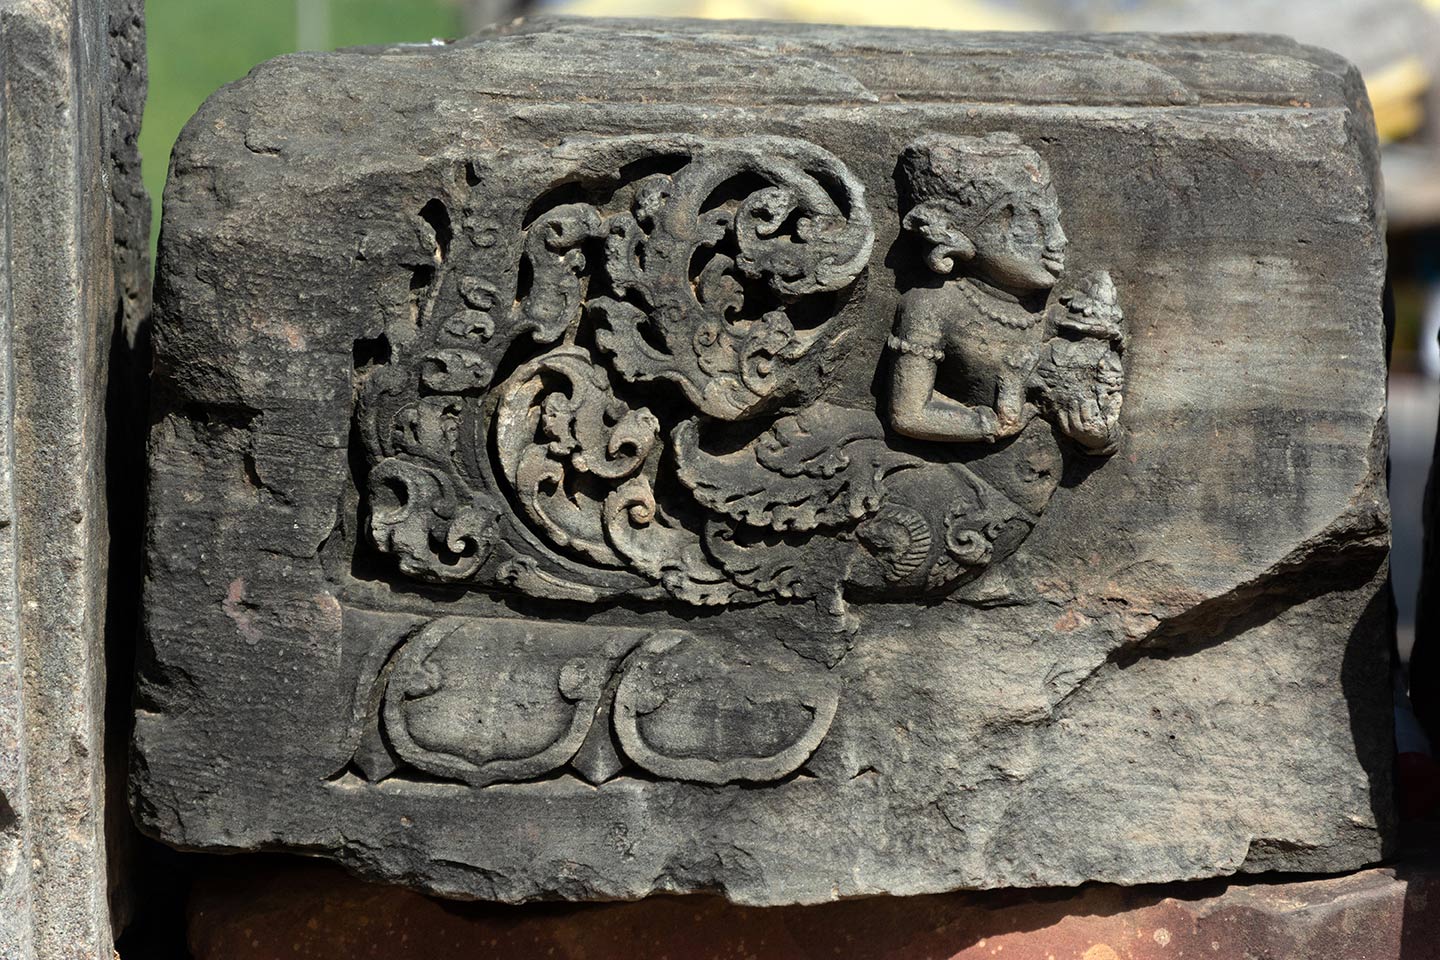 The carving features a kinnari holding a purna ghata (a symbol of abundance, prosperity, and fertility). The upper body of the kinnari is depicted with a female human figure and the lower body consists of a bird which forms a floral motif at the rear.